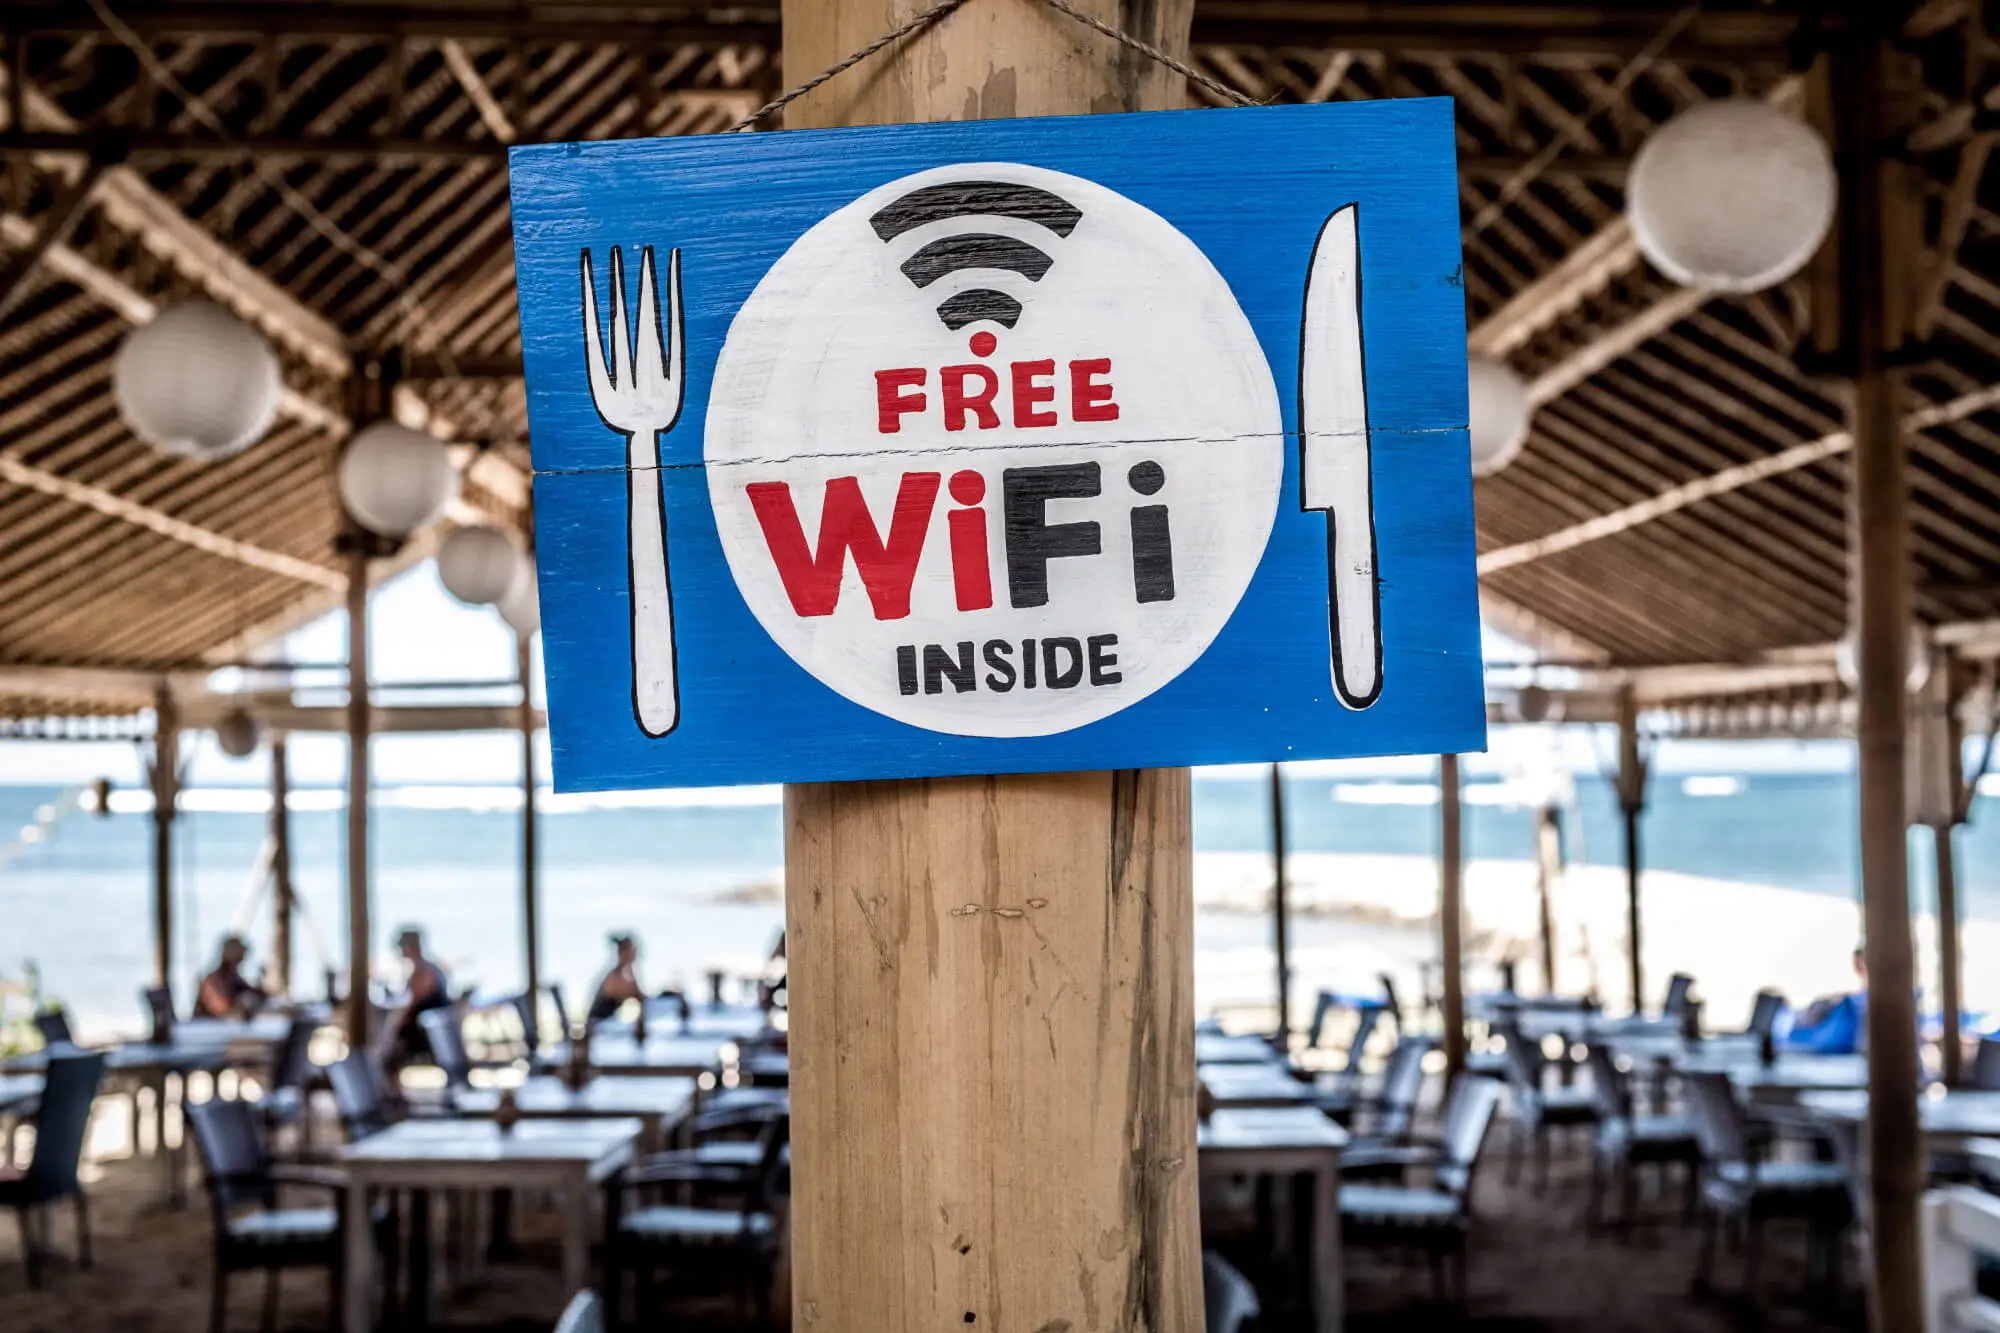 Be cautious when working on free public Wi-Fi. Free doesn